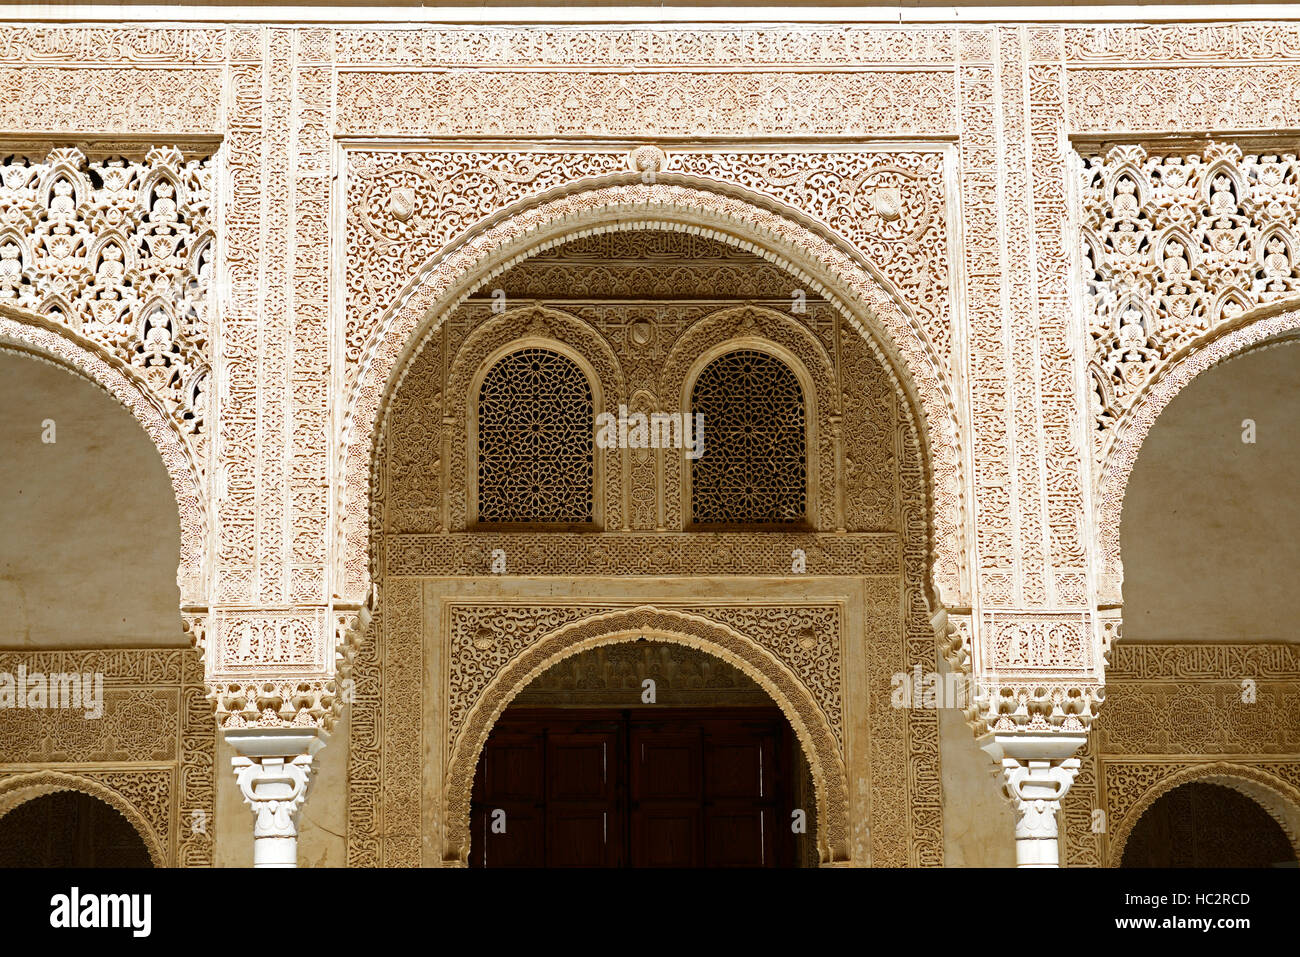 arched arch archway ornate wall detail nasrid palace Alhambra Gardens Generalife UNESCO world heritage site RM Floral Stock Photo